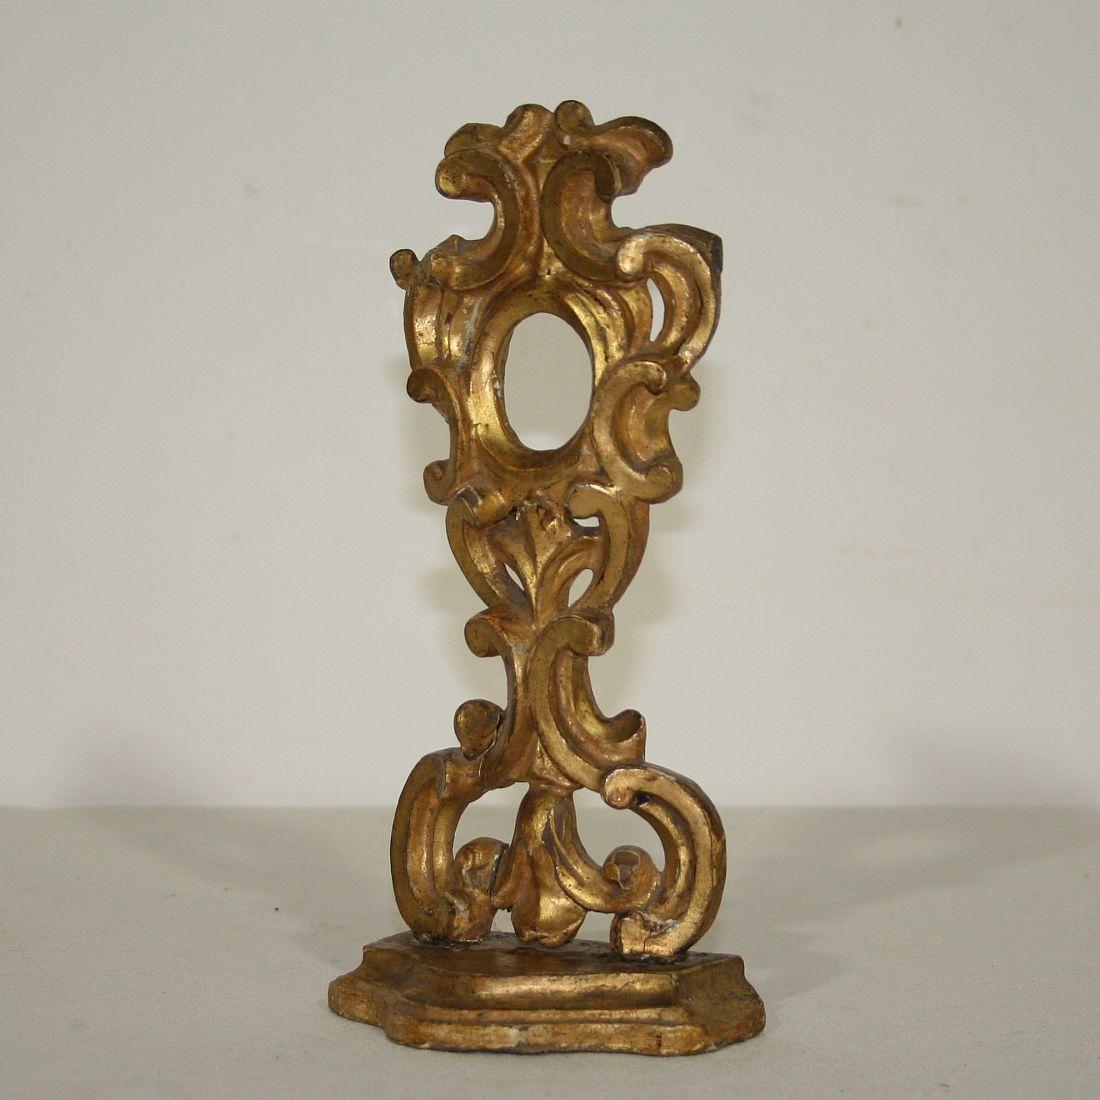 Hand-Carved Italian, 18th Century Carved Giltwood Baroque Reliquary